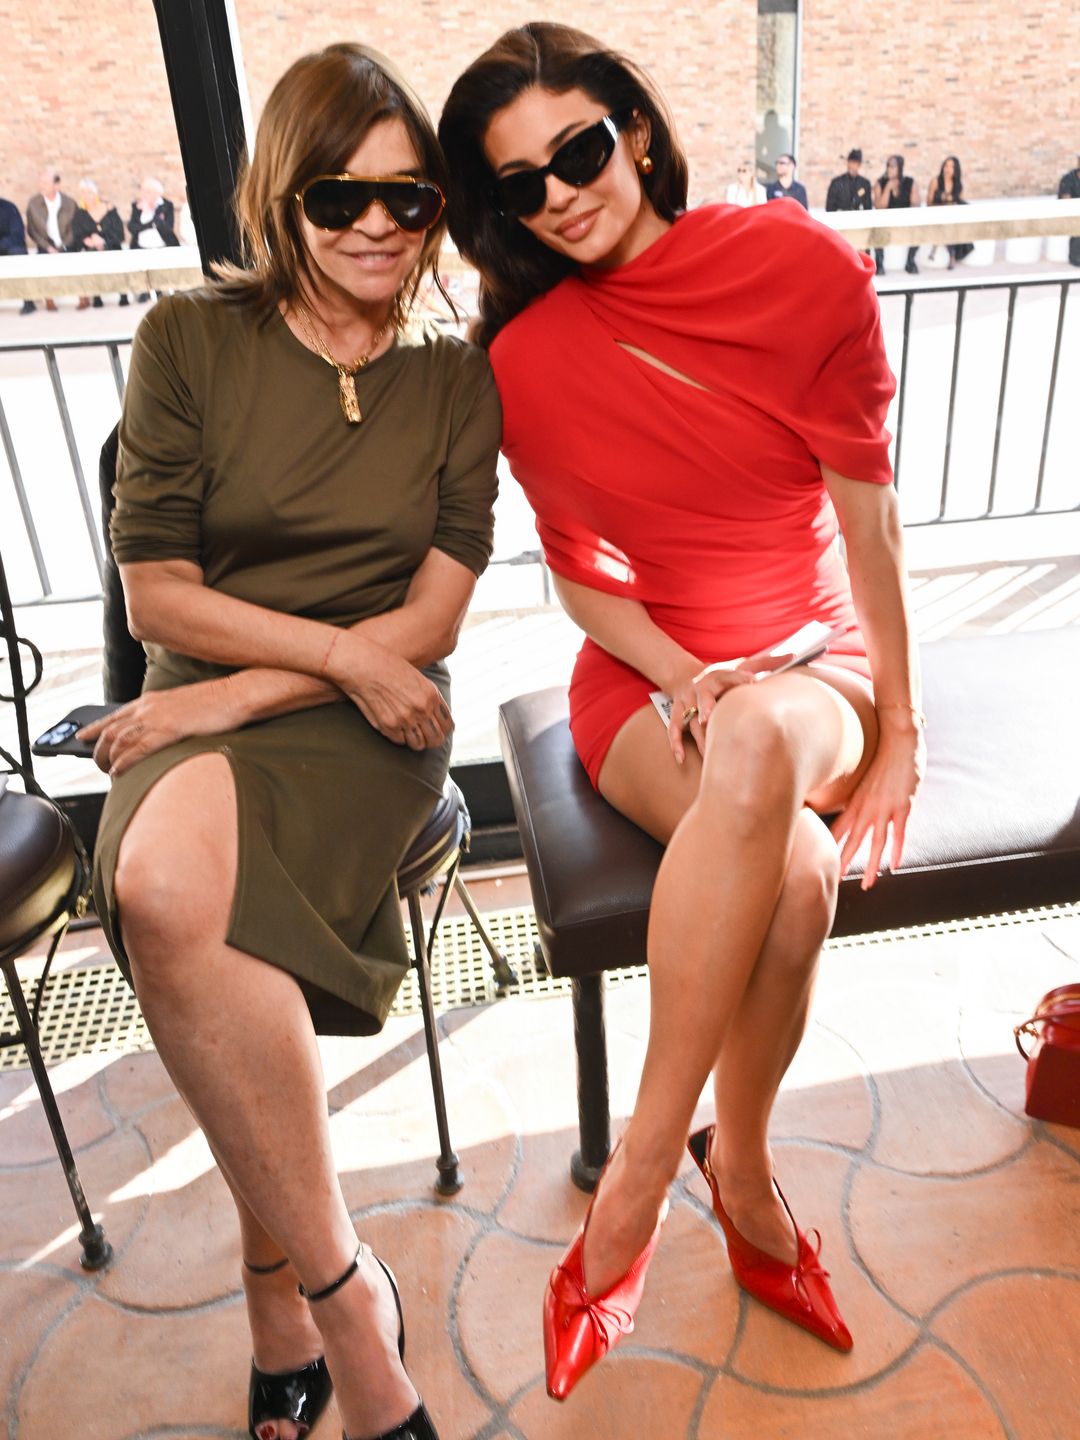 Carine Roitfeld and Kylie Jenner smile for the camera at the Jacquemus Fashion Show. Kylie wears a red dress and matching heels where Carine wears a khaki dress